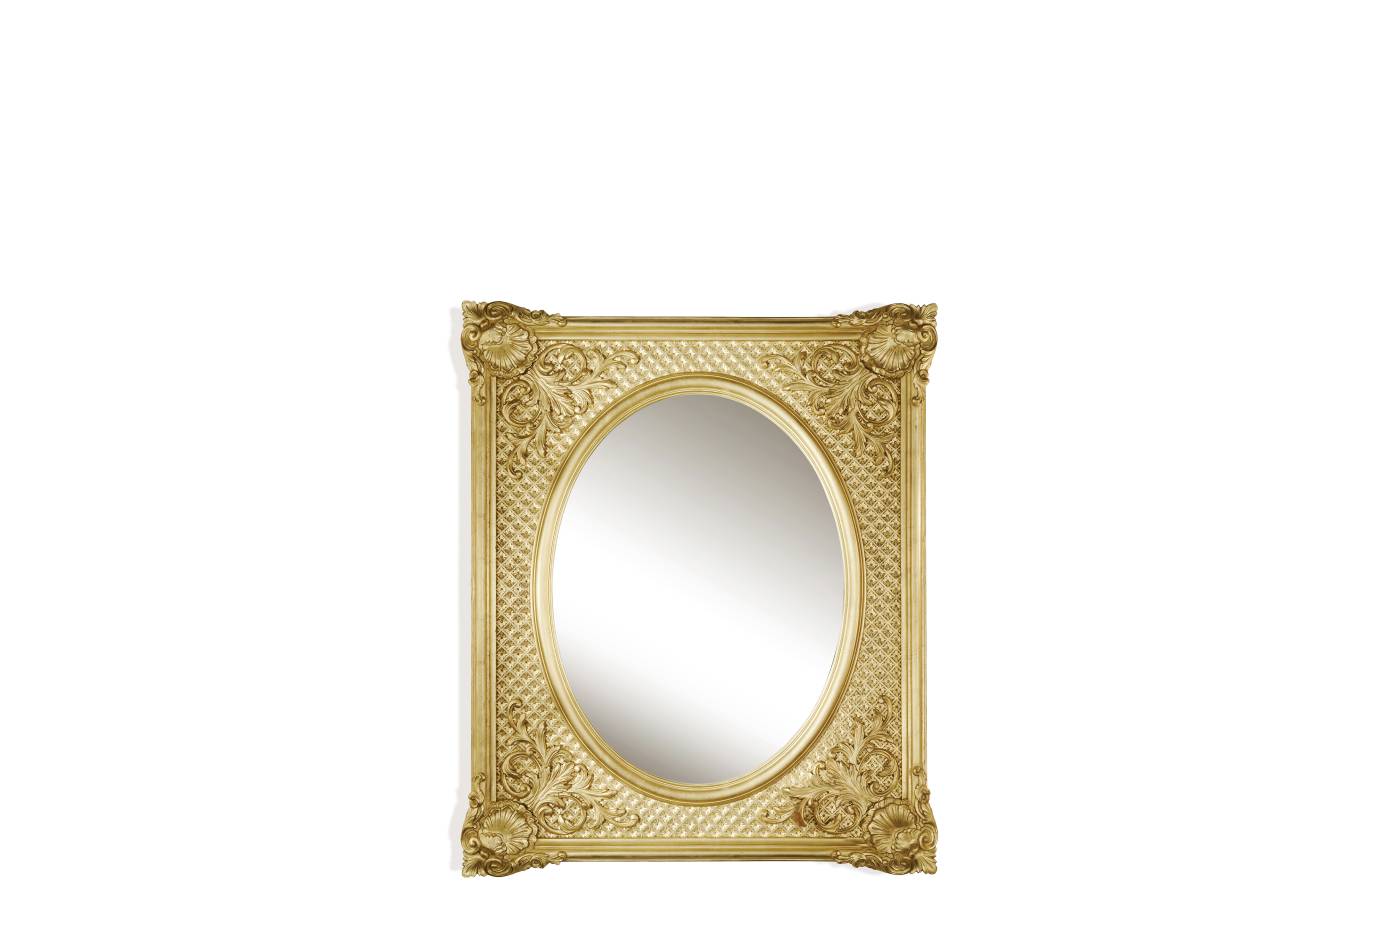 DORÉ mirror – Jumbo Collection Italian luxury classic MIRRORS. tailor-made interior design projects to meet all your furnishing needs